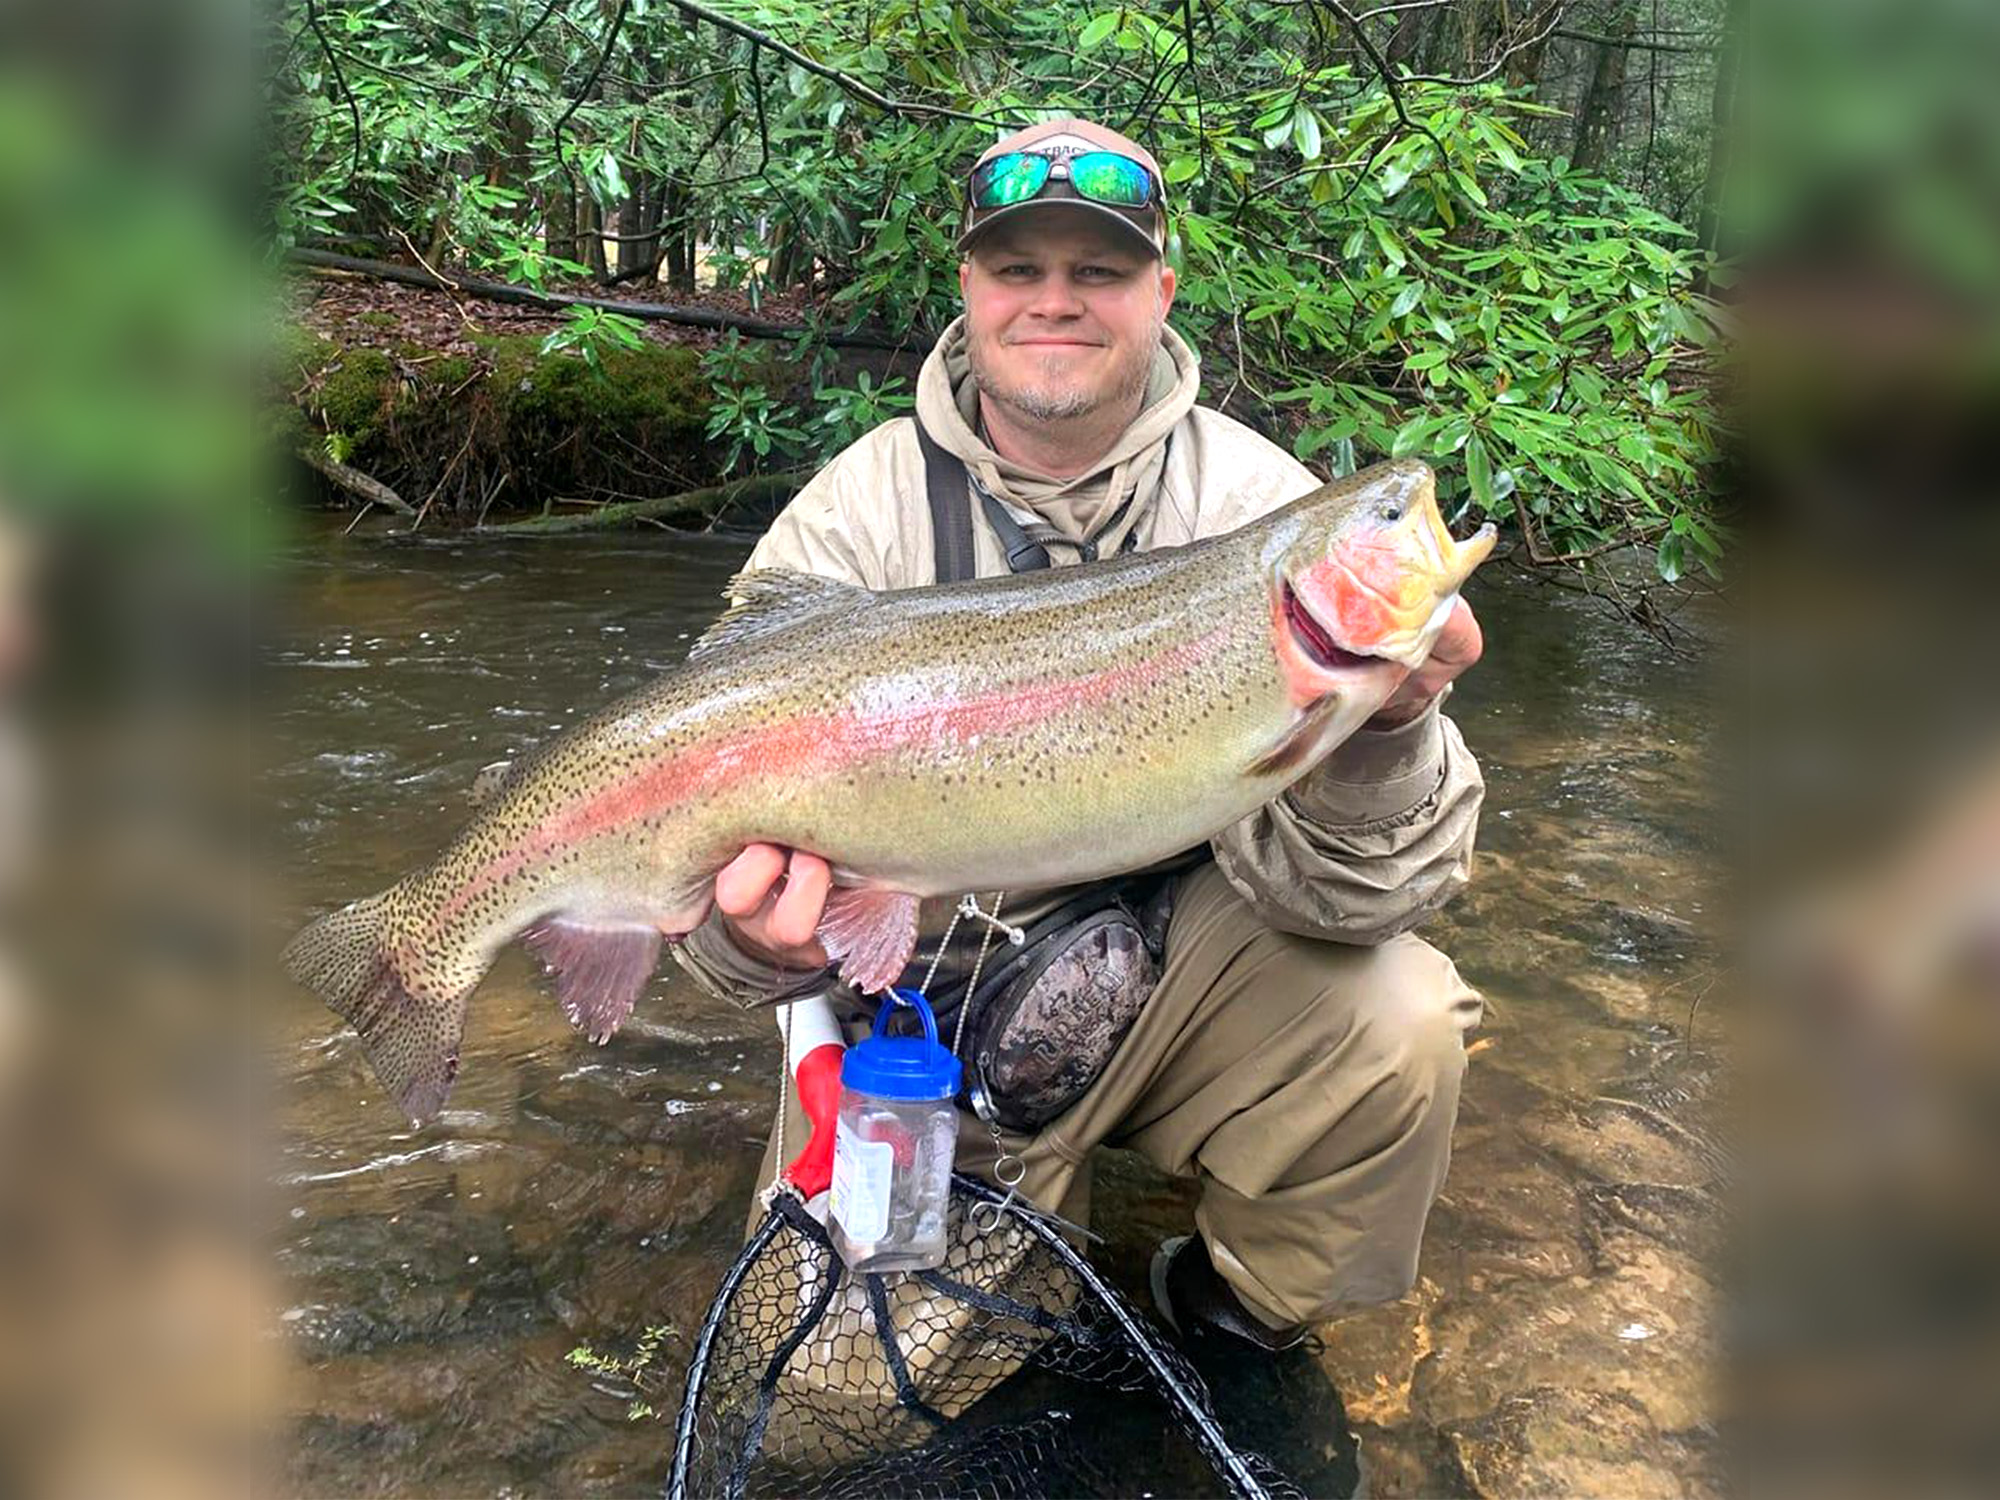 https://www.outdoorlife.com/wp-content/uploads/2023/05/16/pennsylvania_record_sized_rainbow_trout.jpg?w=2000